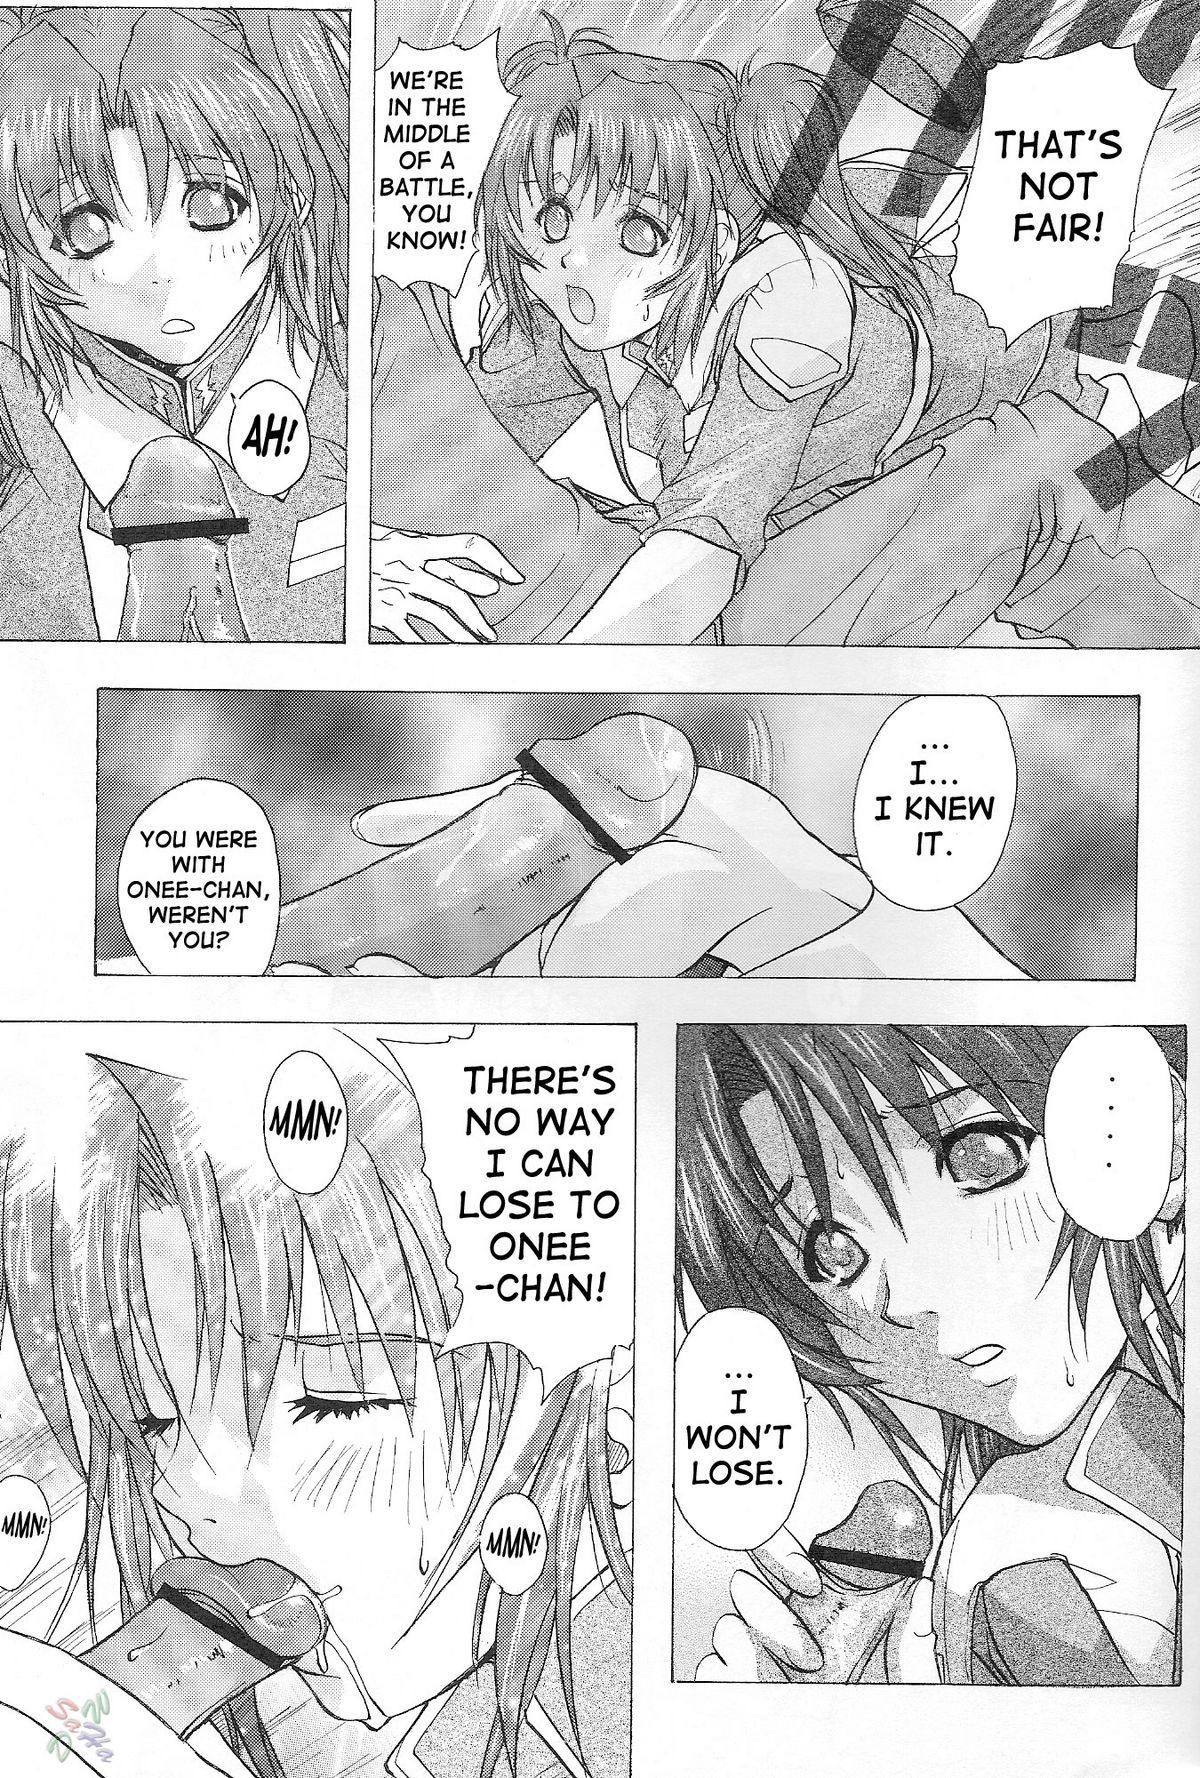 Fingers G-SEED Angel - Gundam seed destiny 18yearsold - Page 14